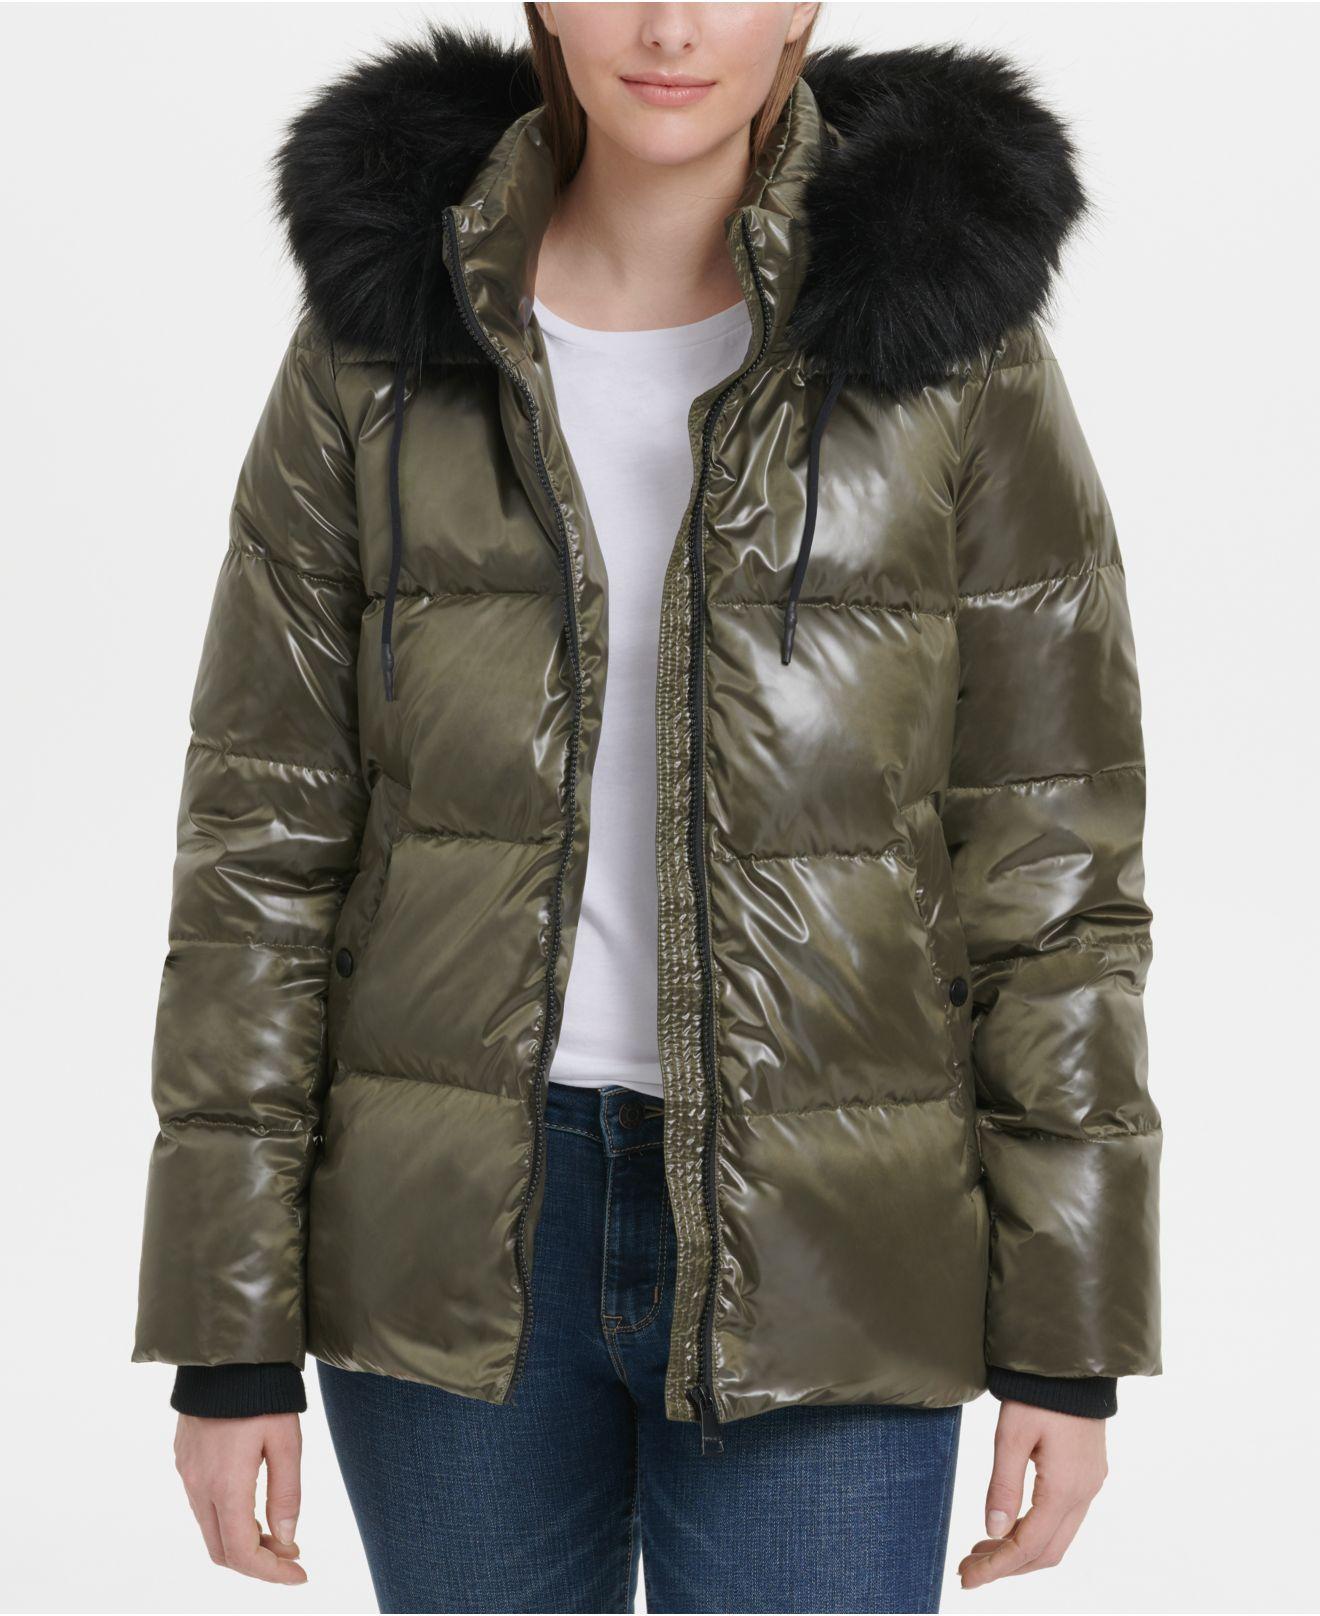 dkny quilted coat